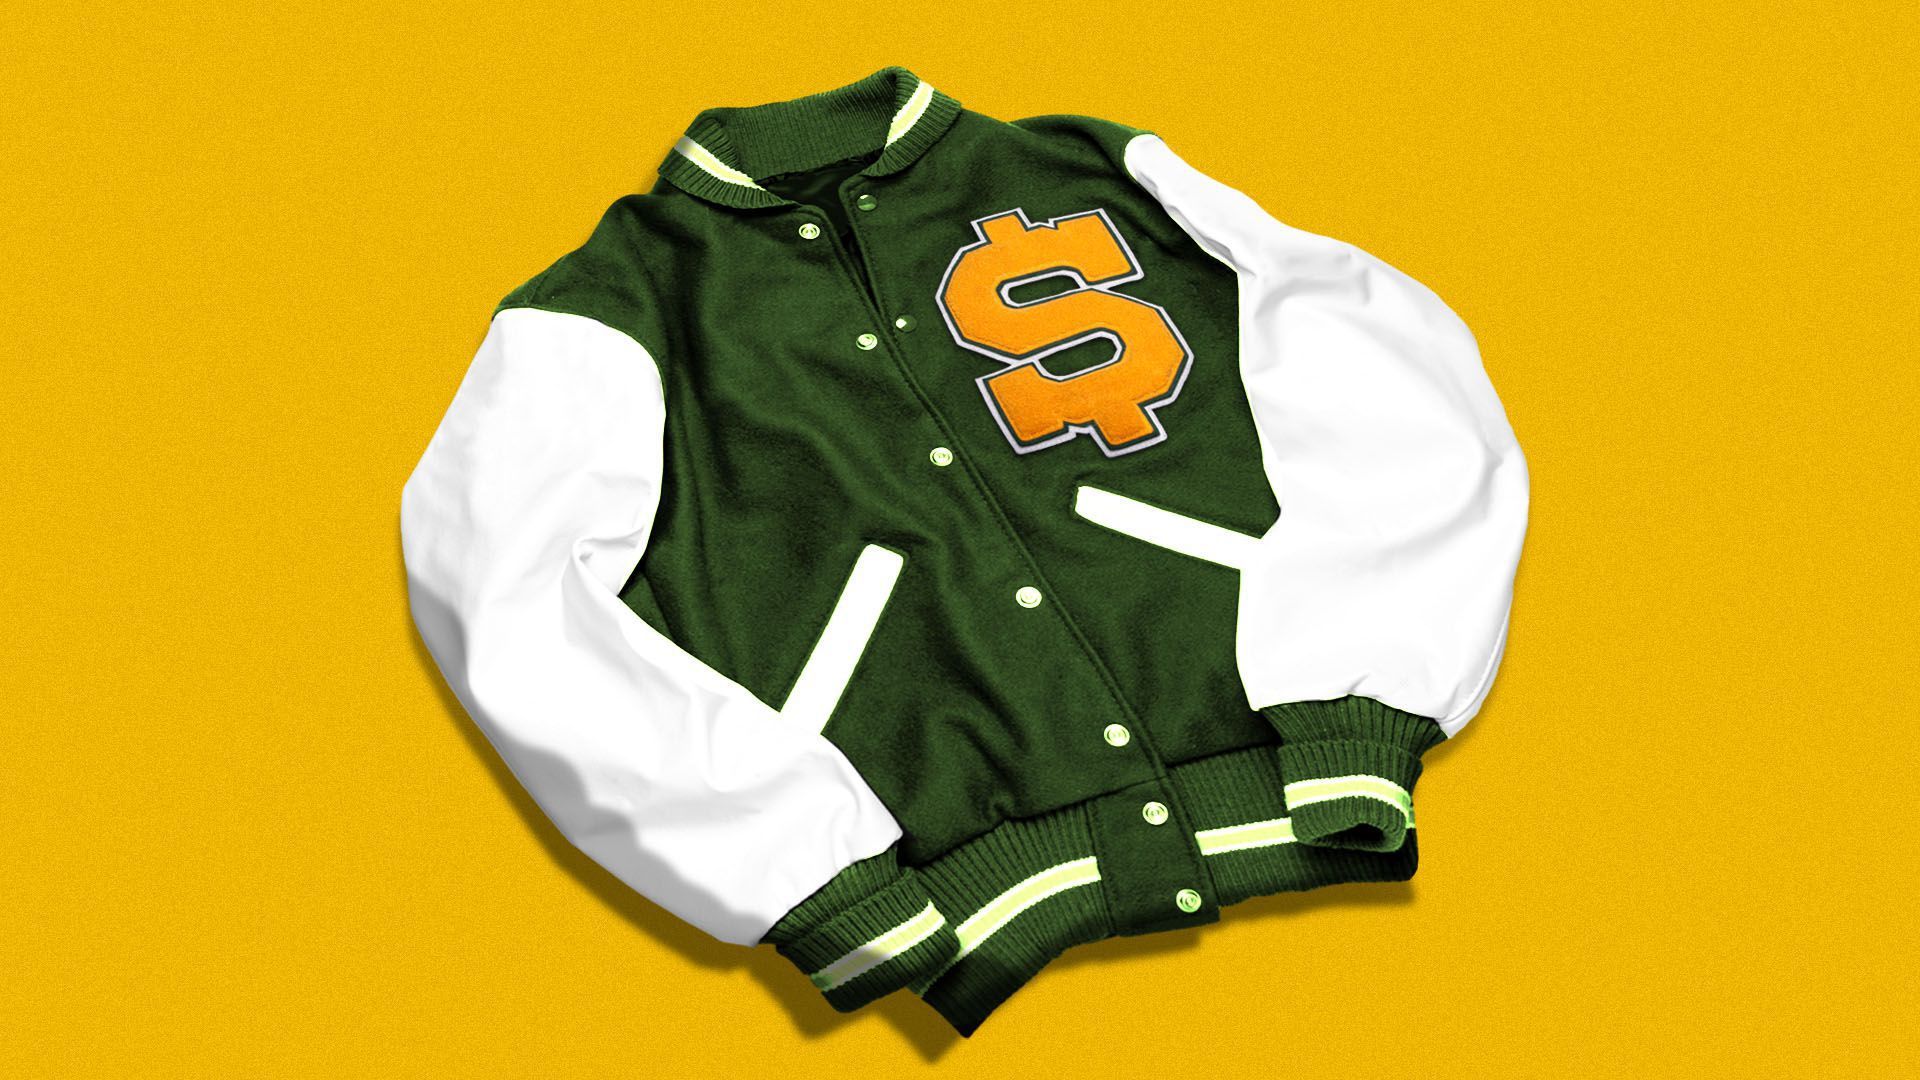 A green-and-white letterman's jacket with a dollar sign patch on the breast pocket